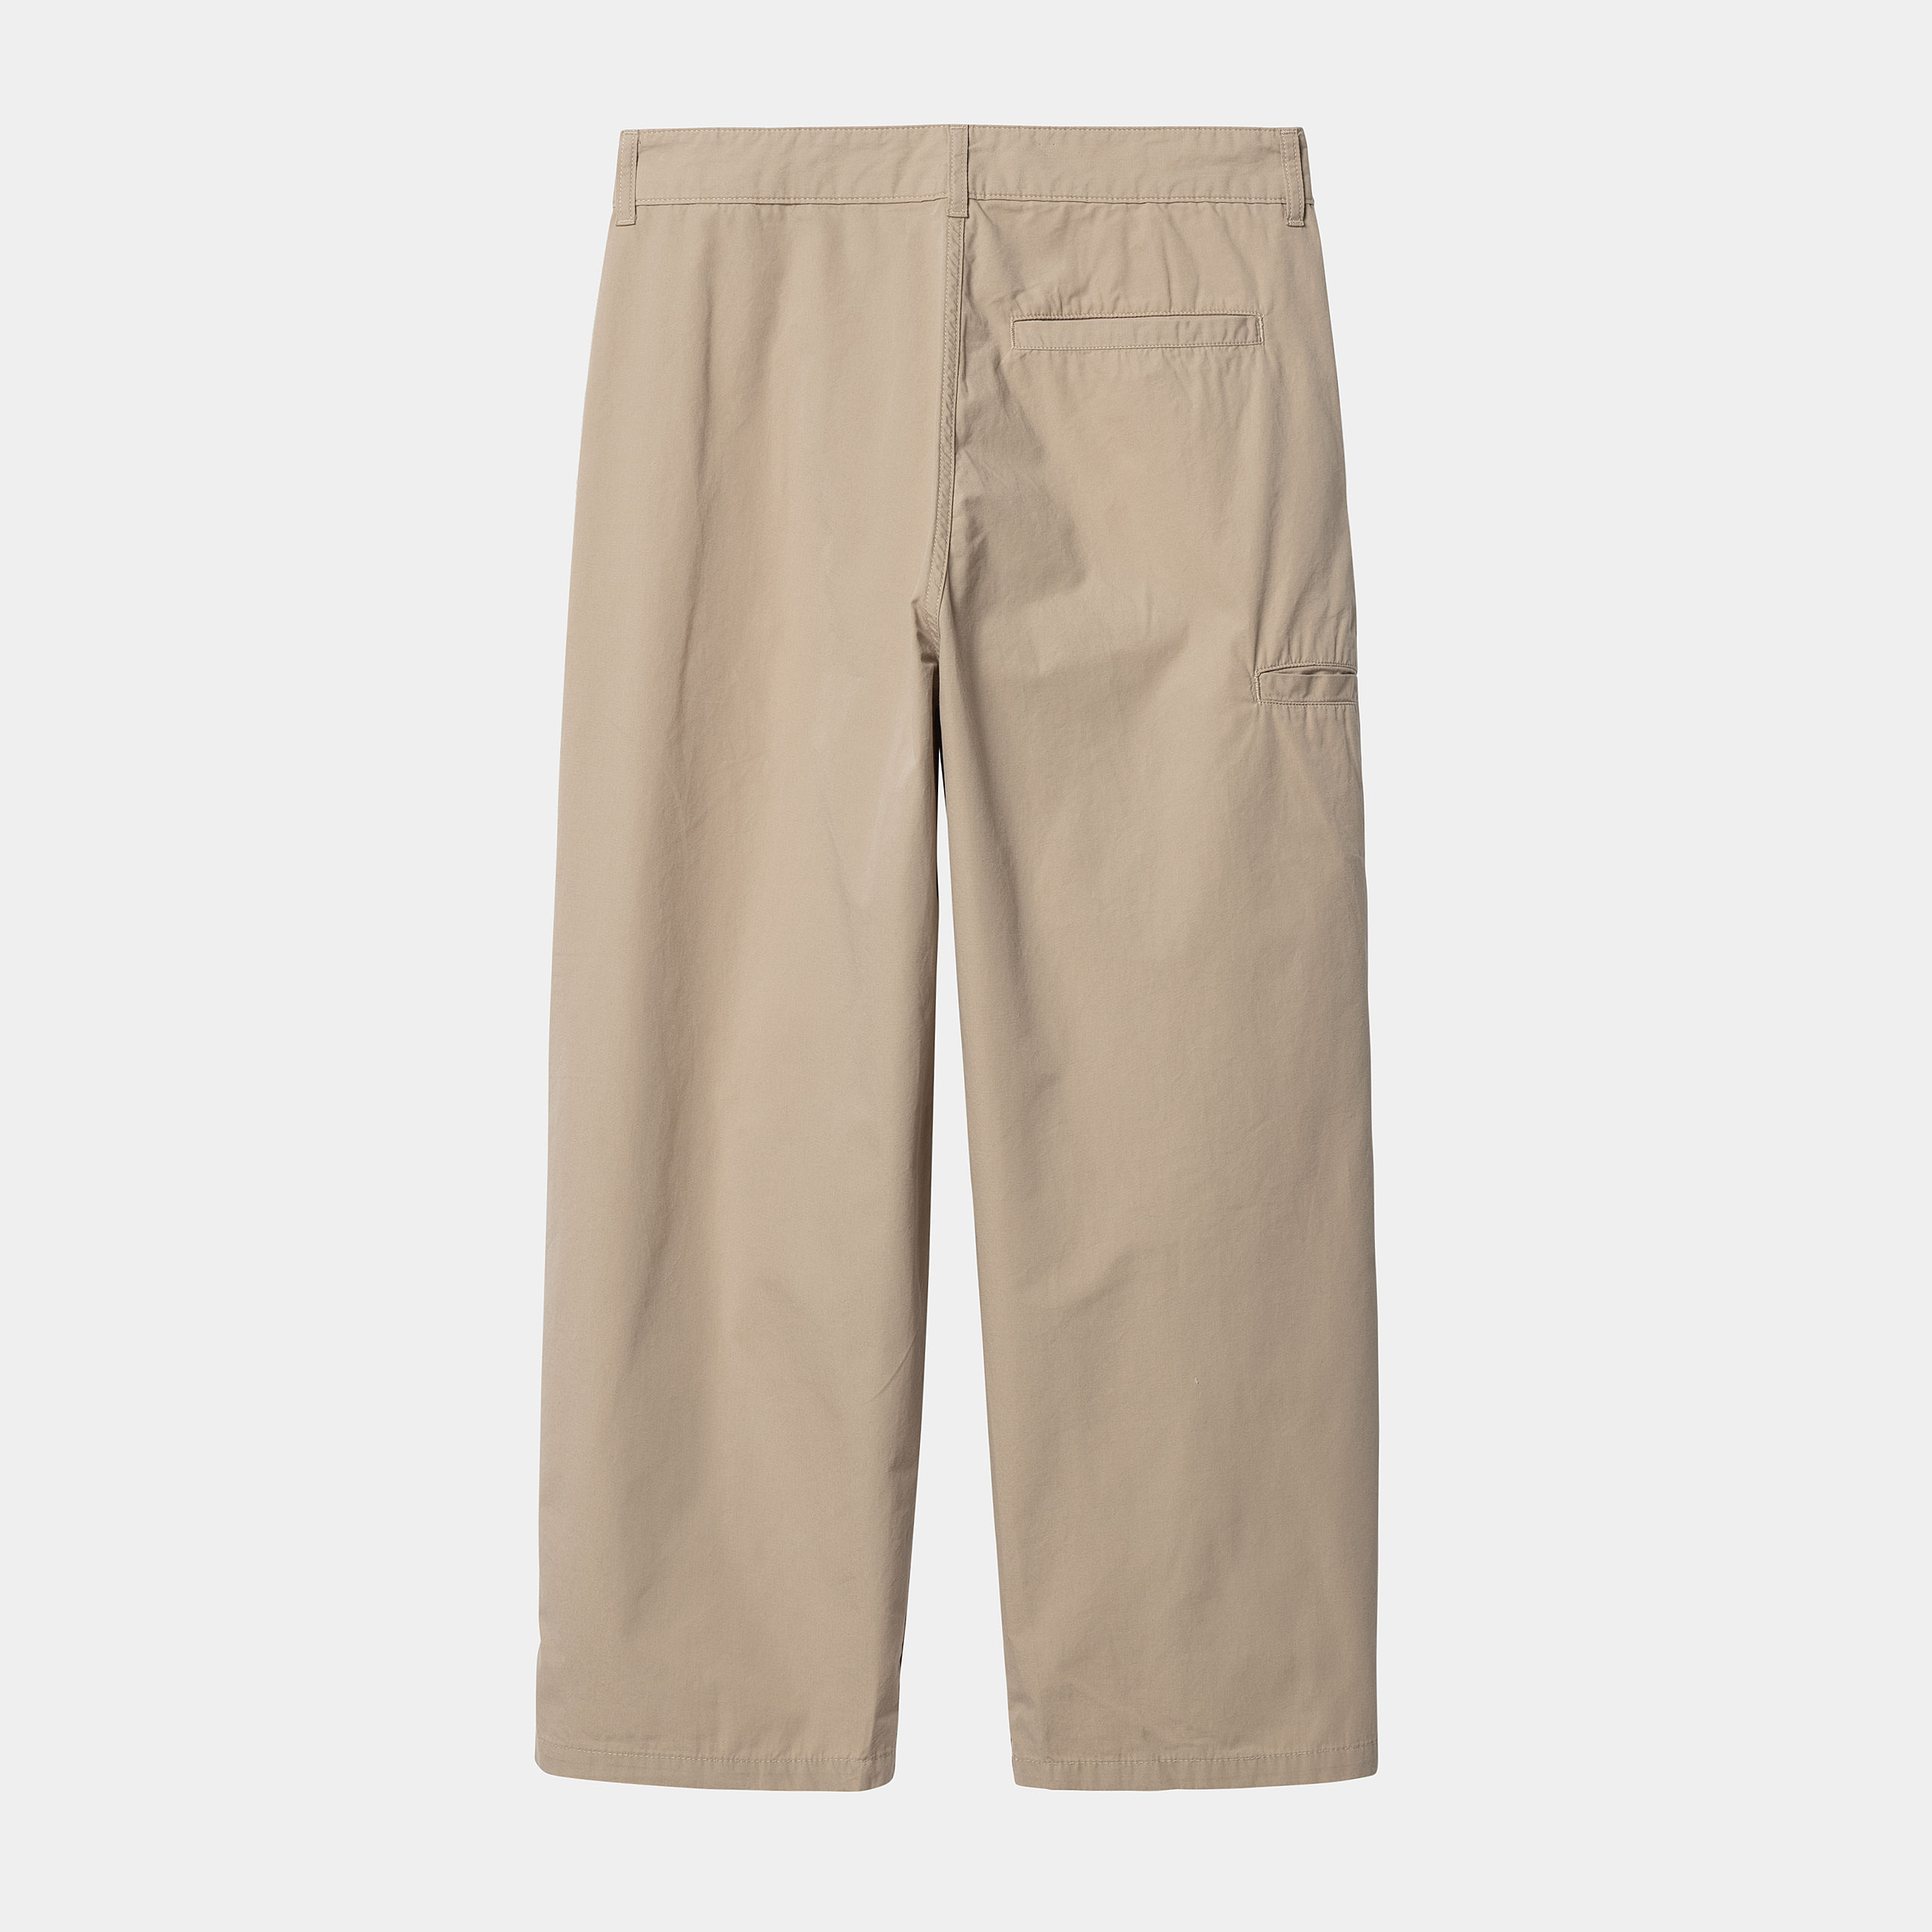 Carhartt WIP - COLSTON PANT - Wall (stone washed)